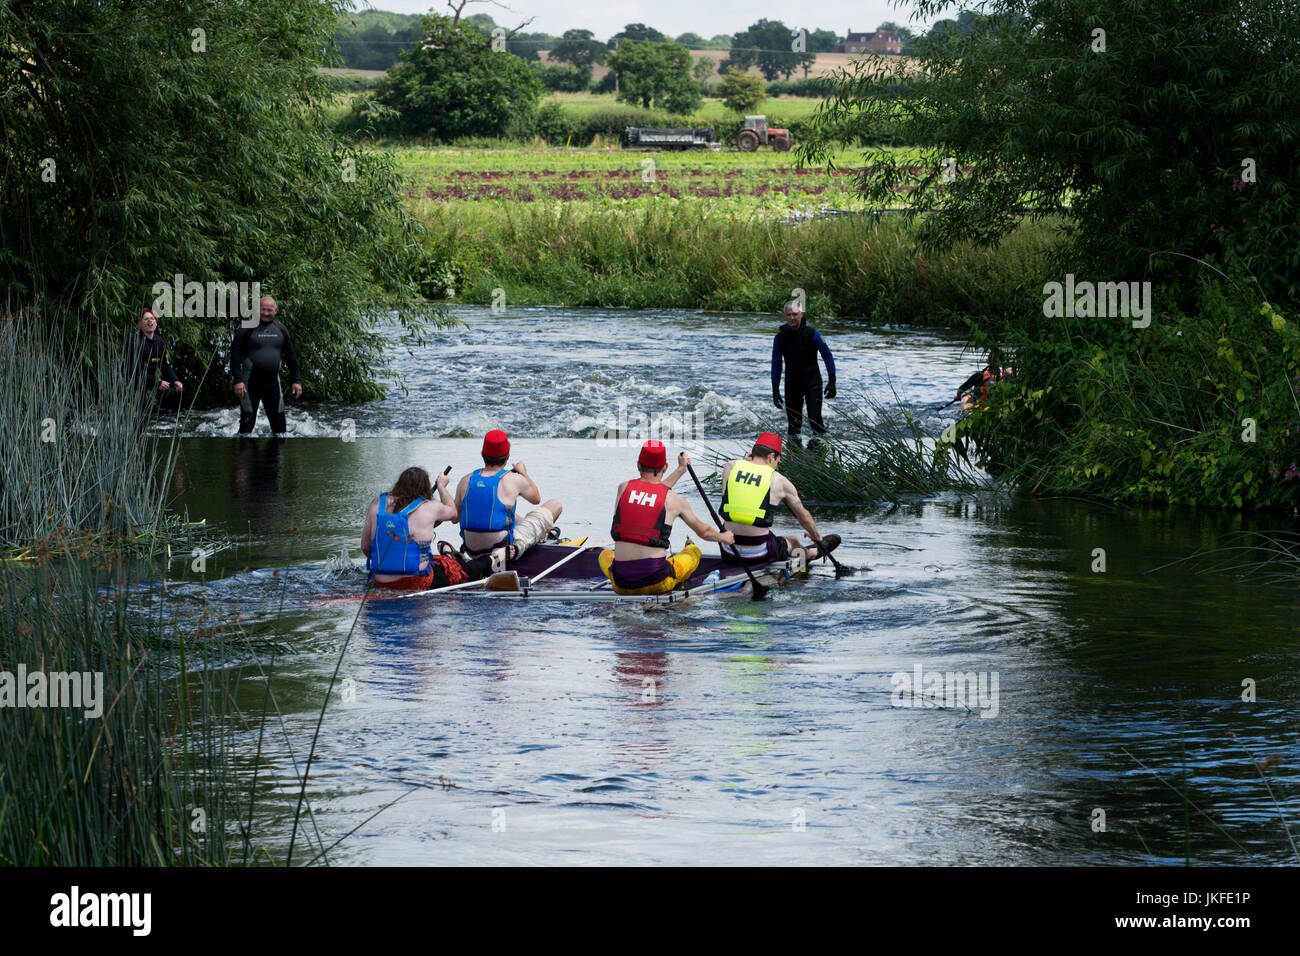 Alveston, Warwickshire, UK. 23rd July, 2017. Competitors approach Alveston Weir on the River Avon as part of the annual Wellesbourne and Stratford Lions Raft Race. The race passes through attractive Warwickshire countryside between the village of Wasperton and the town of Stratford-upon-Avon. Credit: Colin Underhill/Alamy Live News Stock Photo